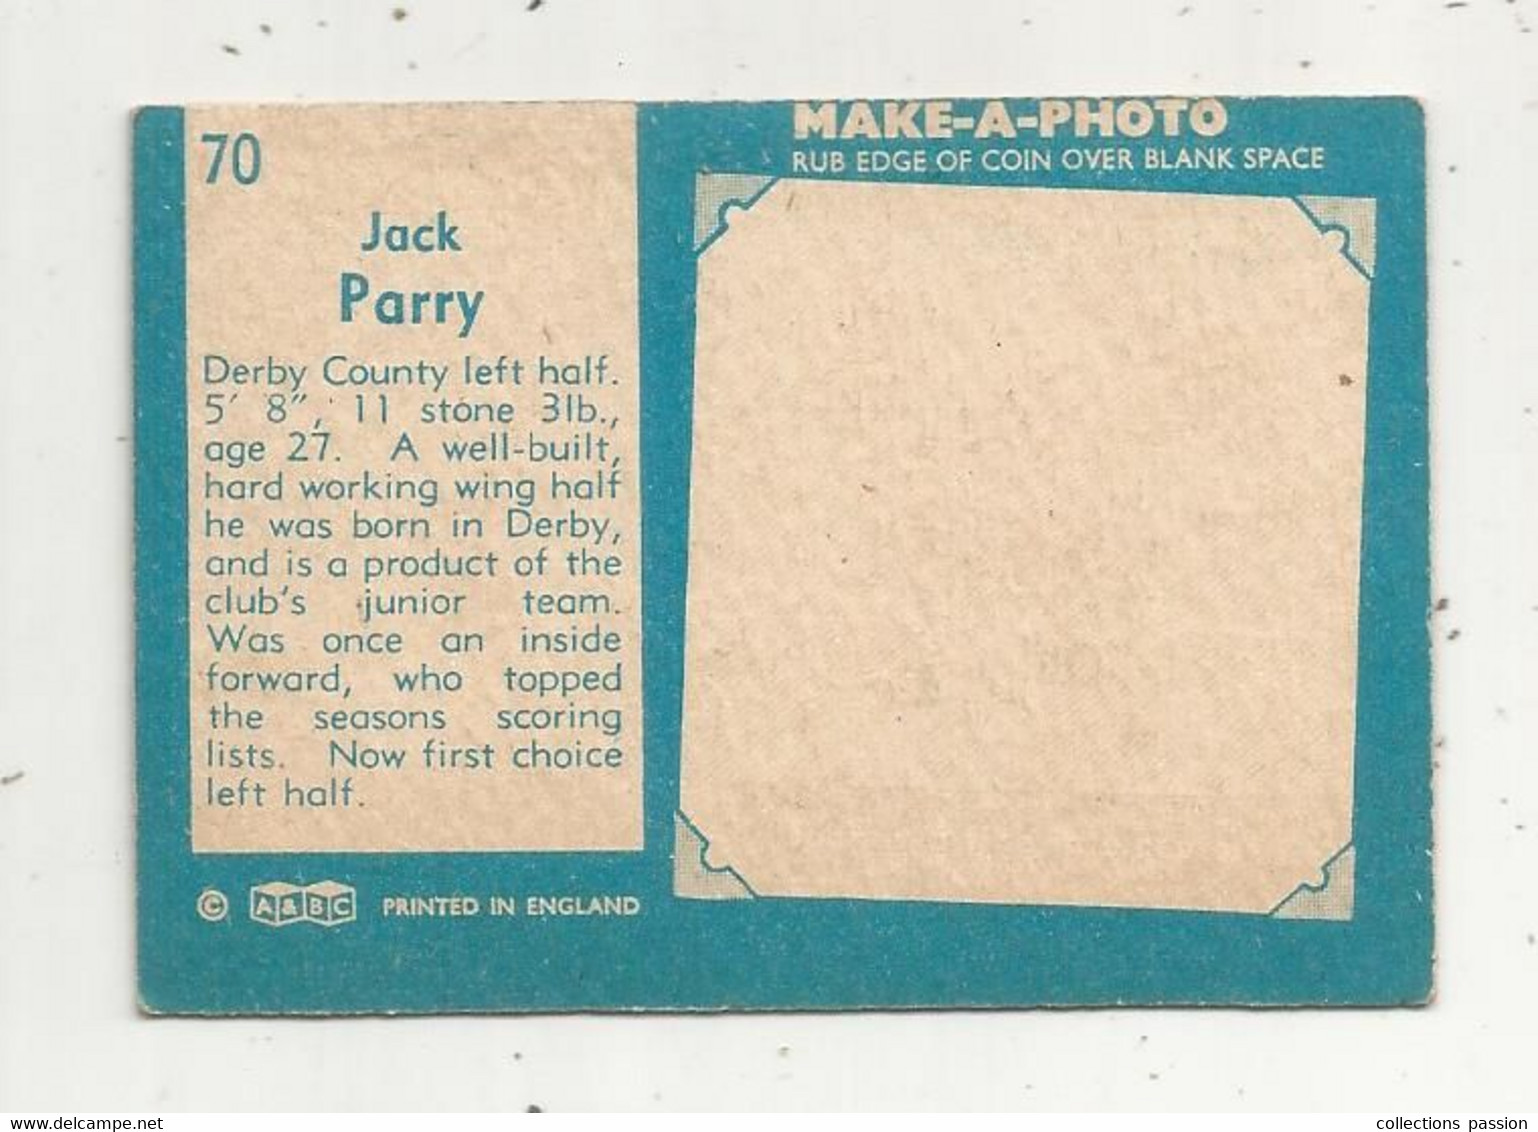 Trading Card , A&BC , England , Chewing Gum , Serie : Make A Photo , Année 60 , N° 70 , JACK PARRY , Derby County - Trading-Karten